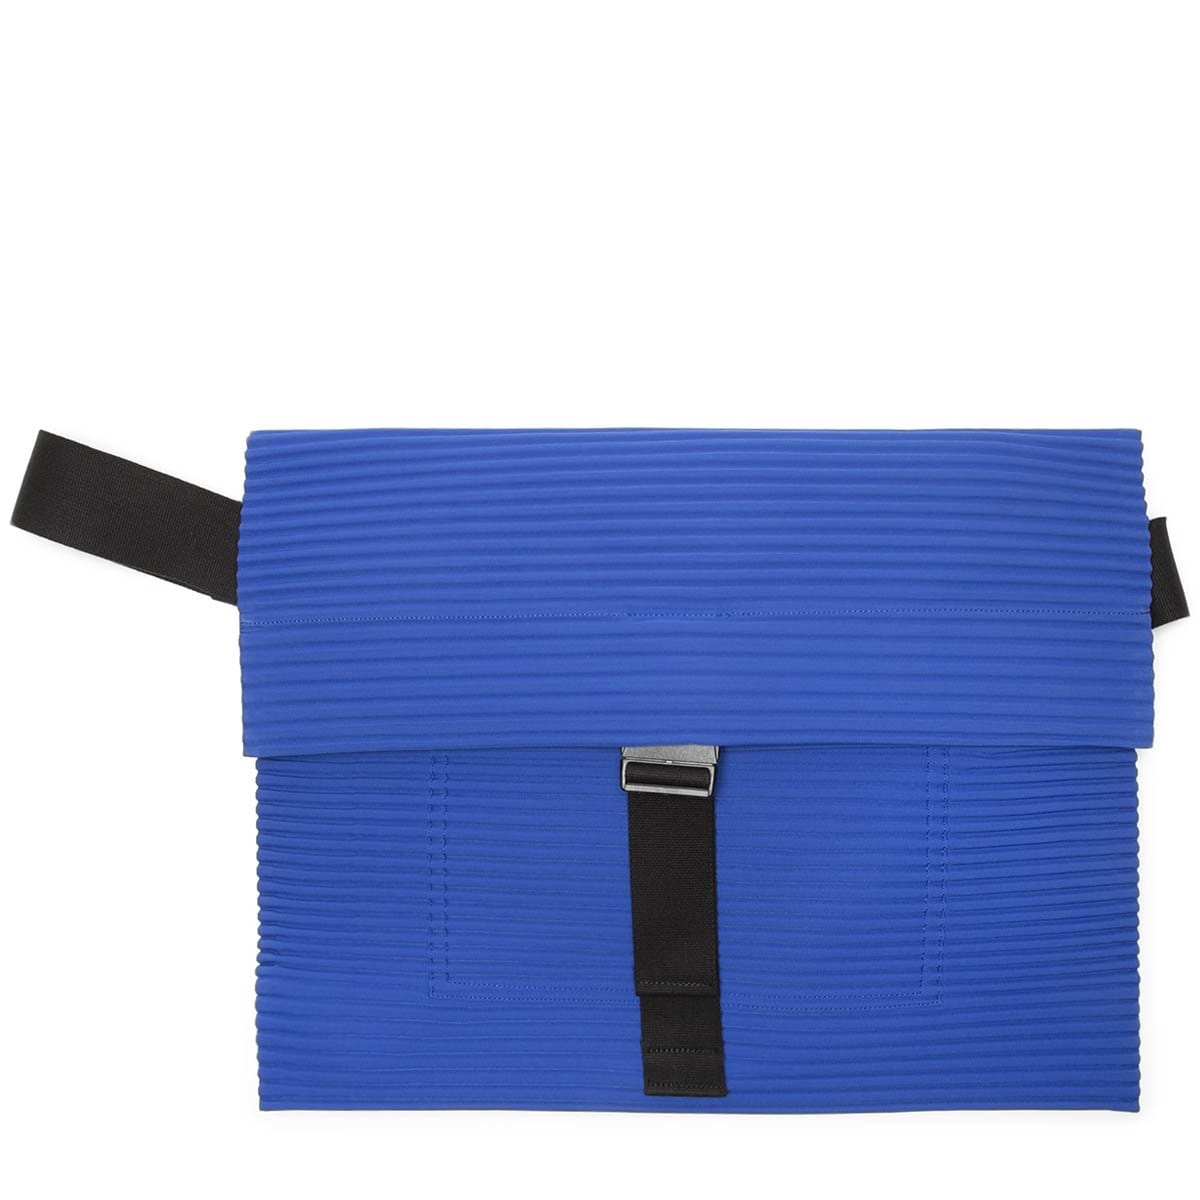 Homme Plissé Issey Miyake Bags & Accessories BLUE / O/S PLEATS FLAT BAG2